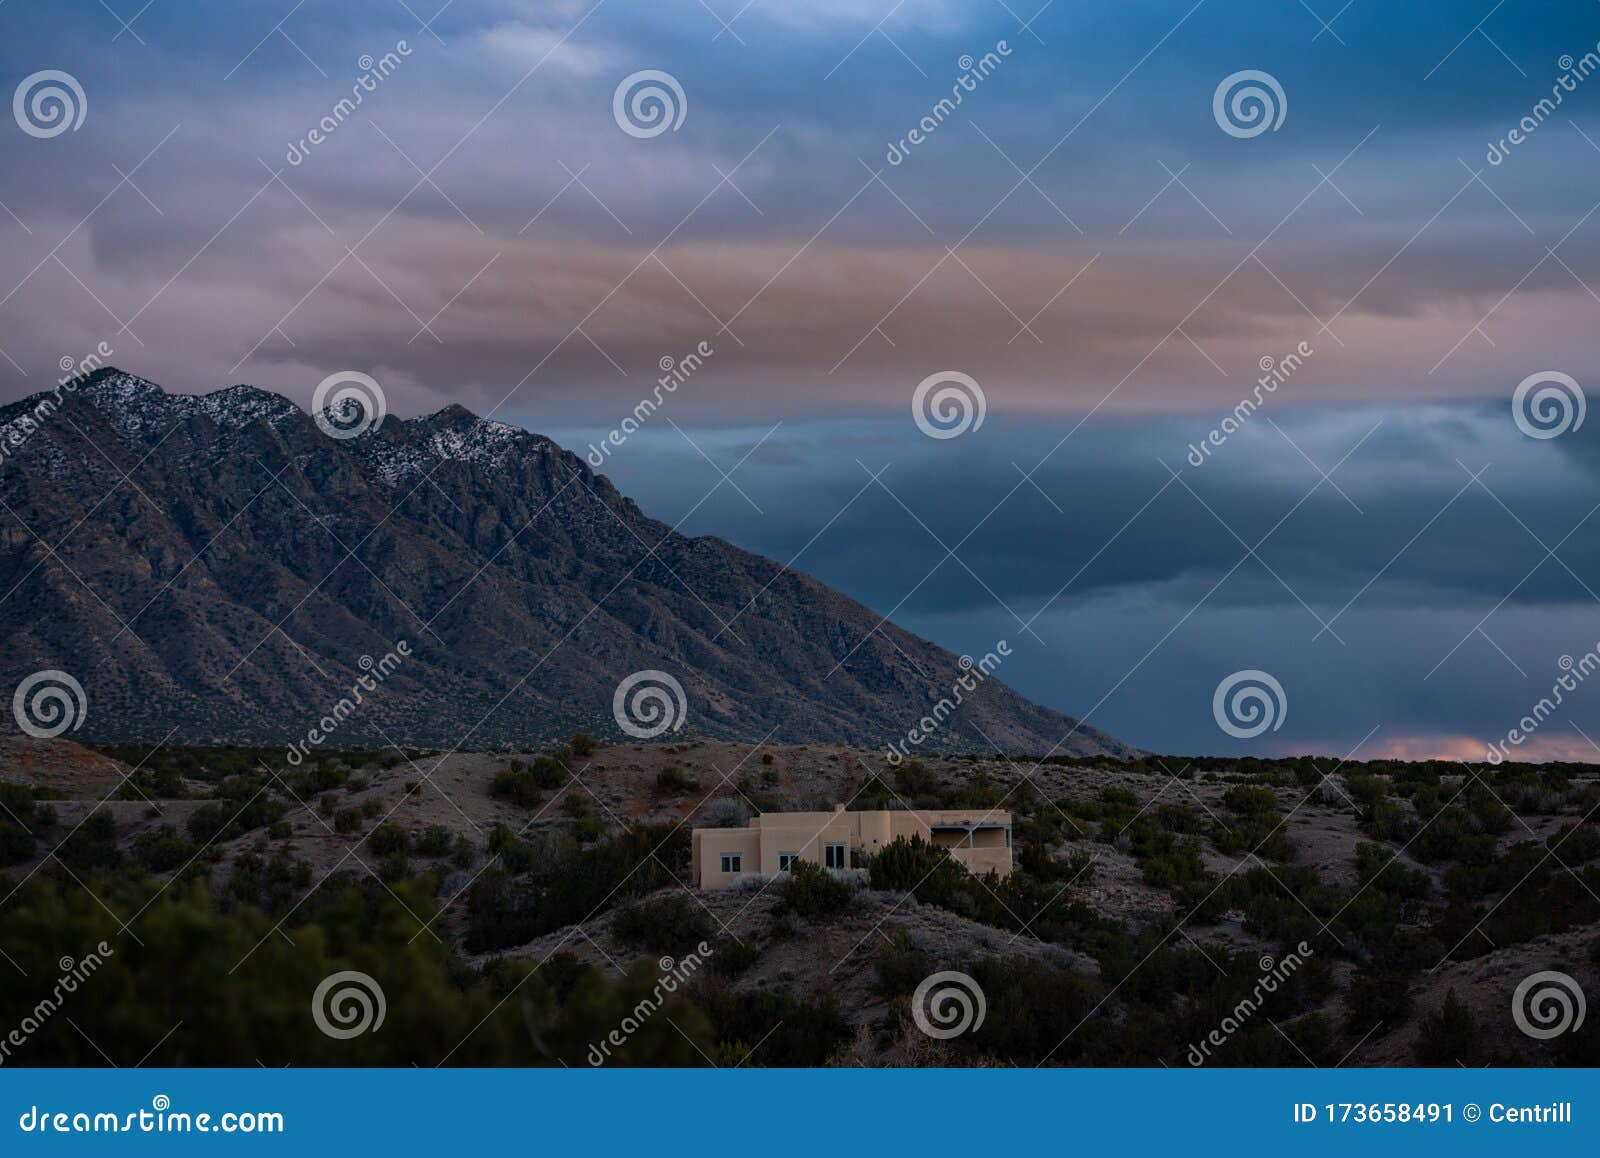 many moods of sandia mountains in new mexico